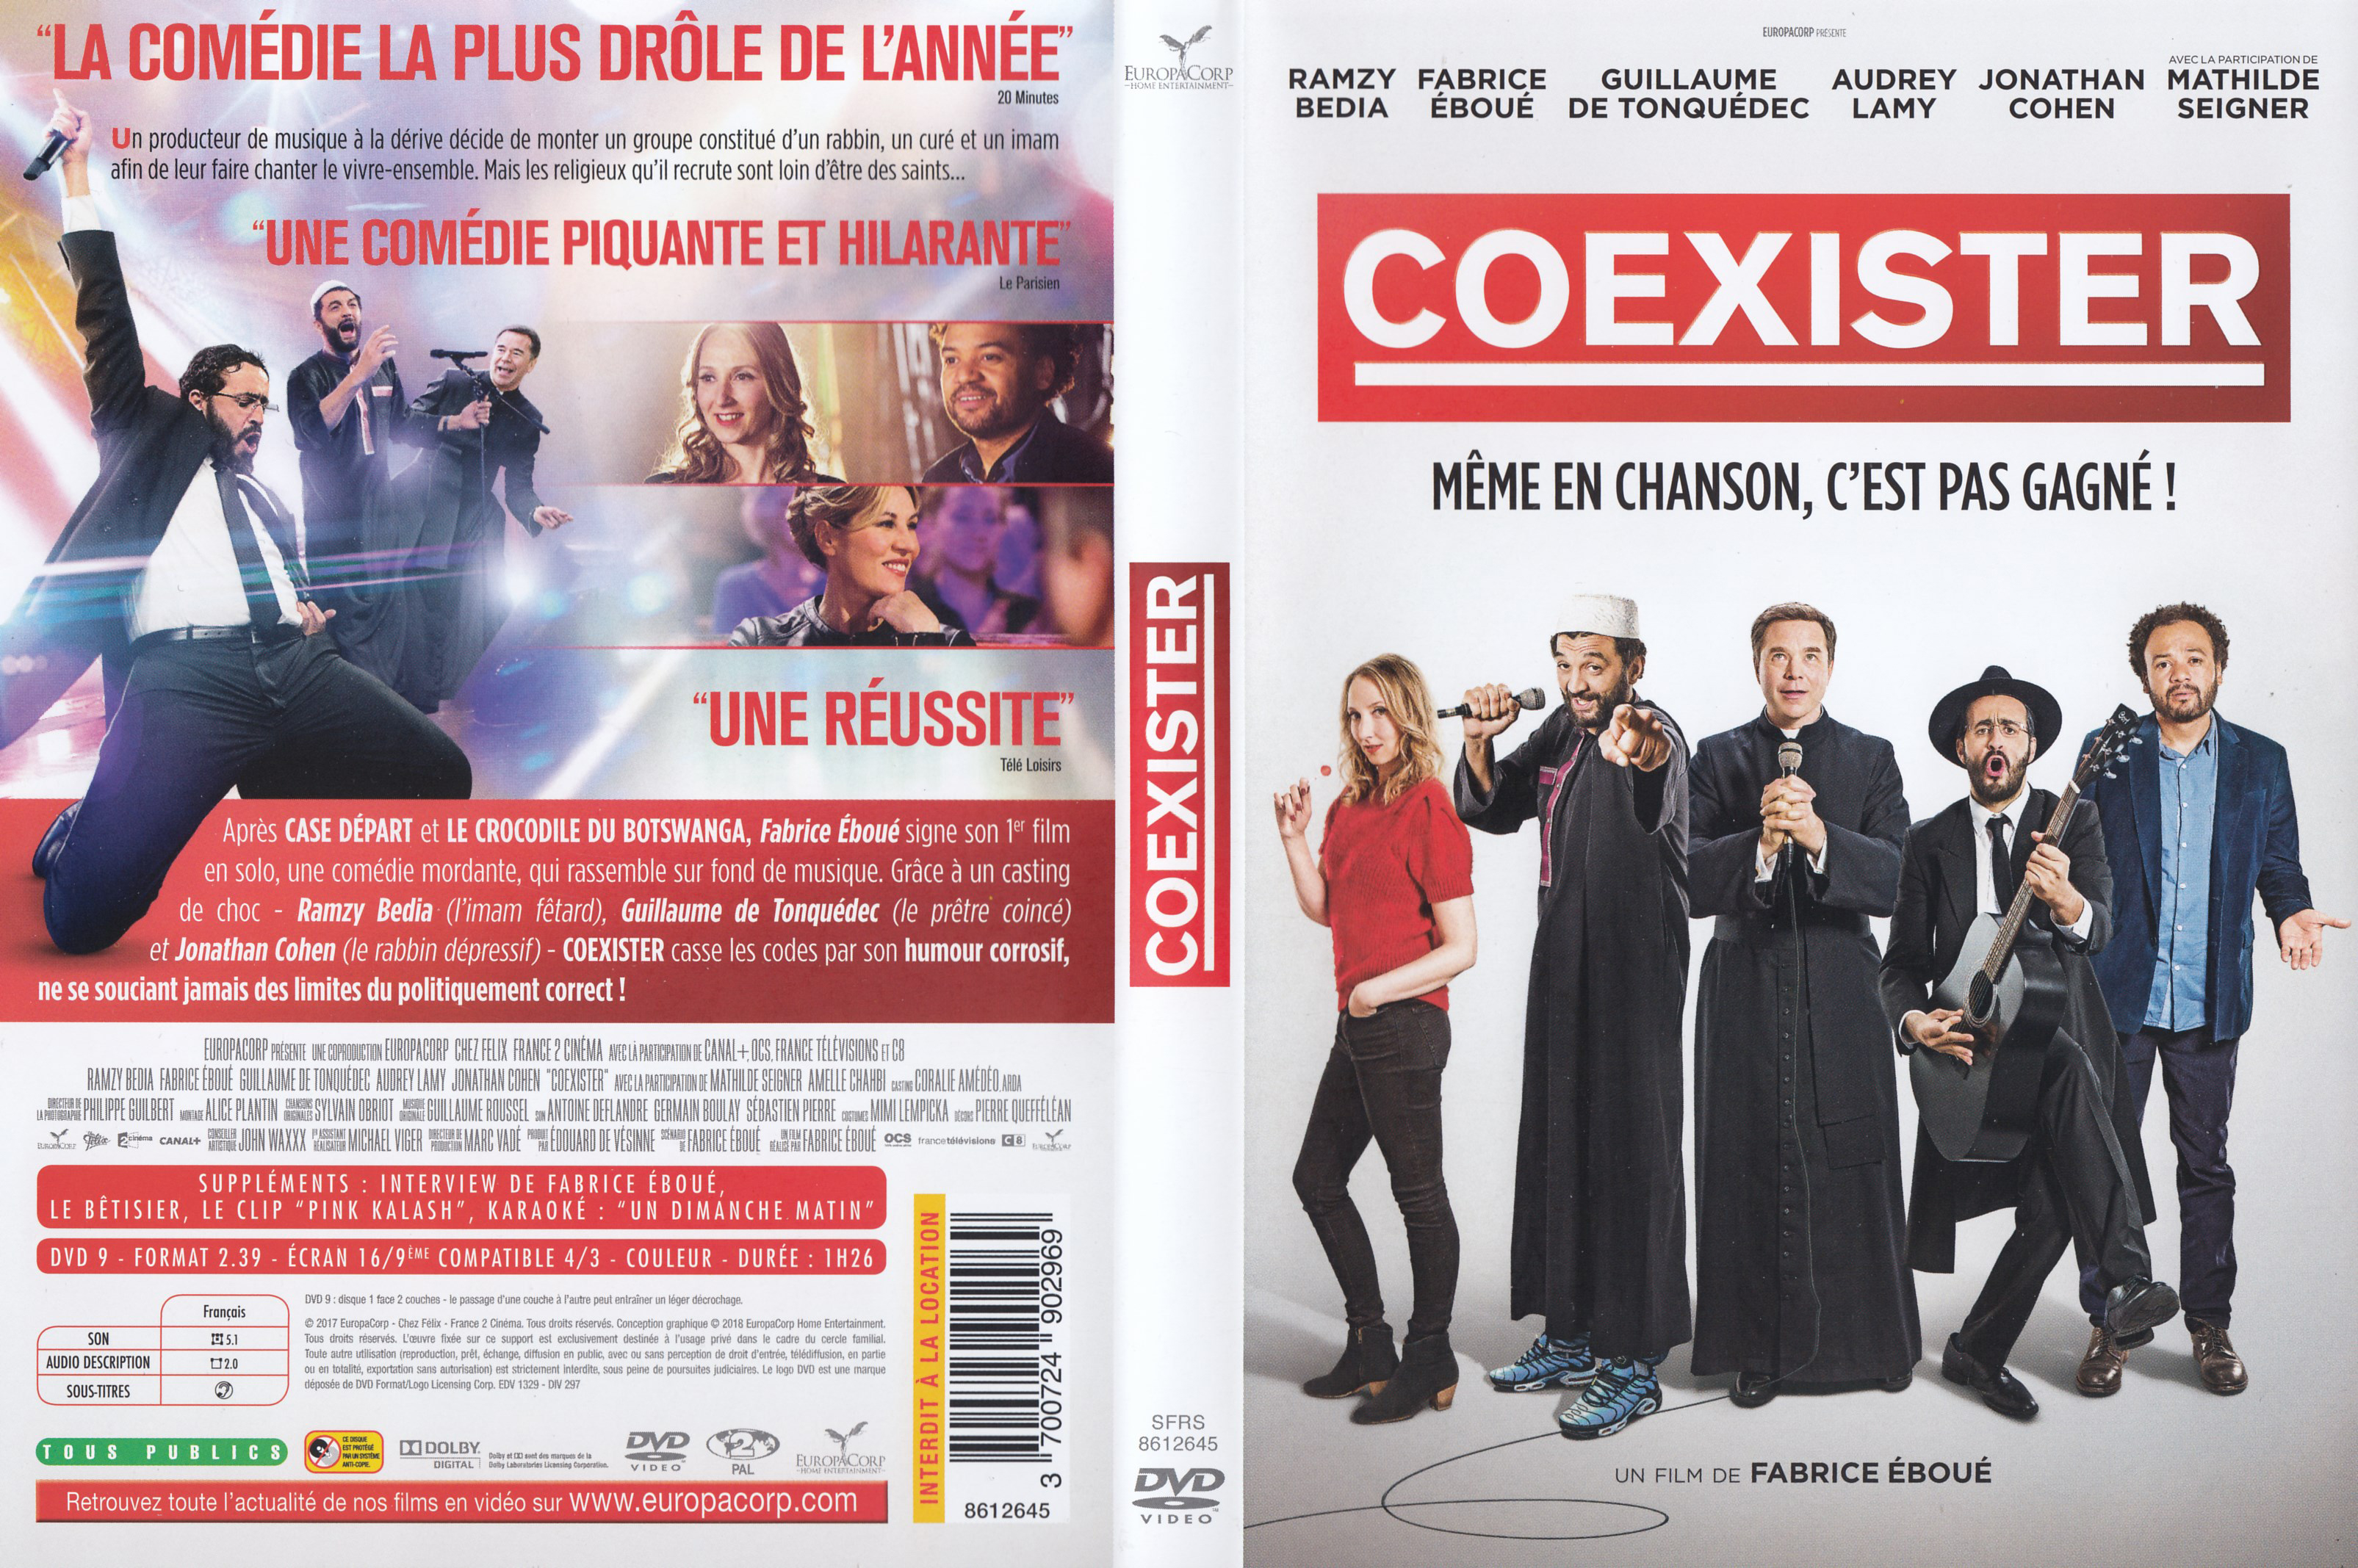 Jaquette DVD Coexister